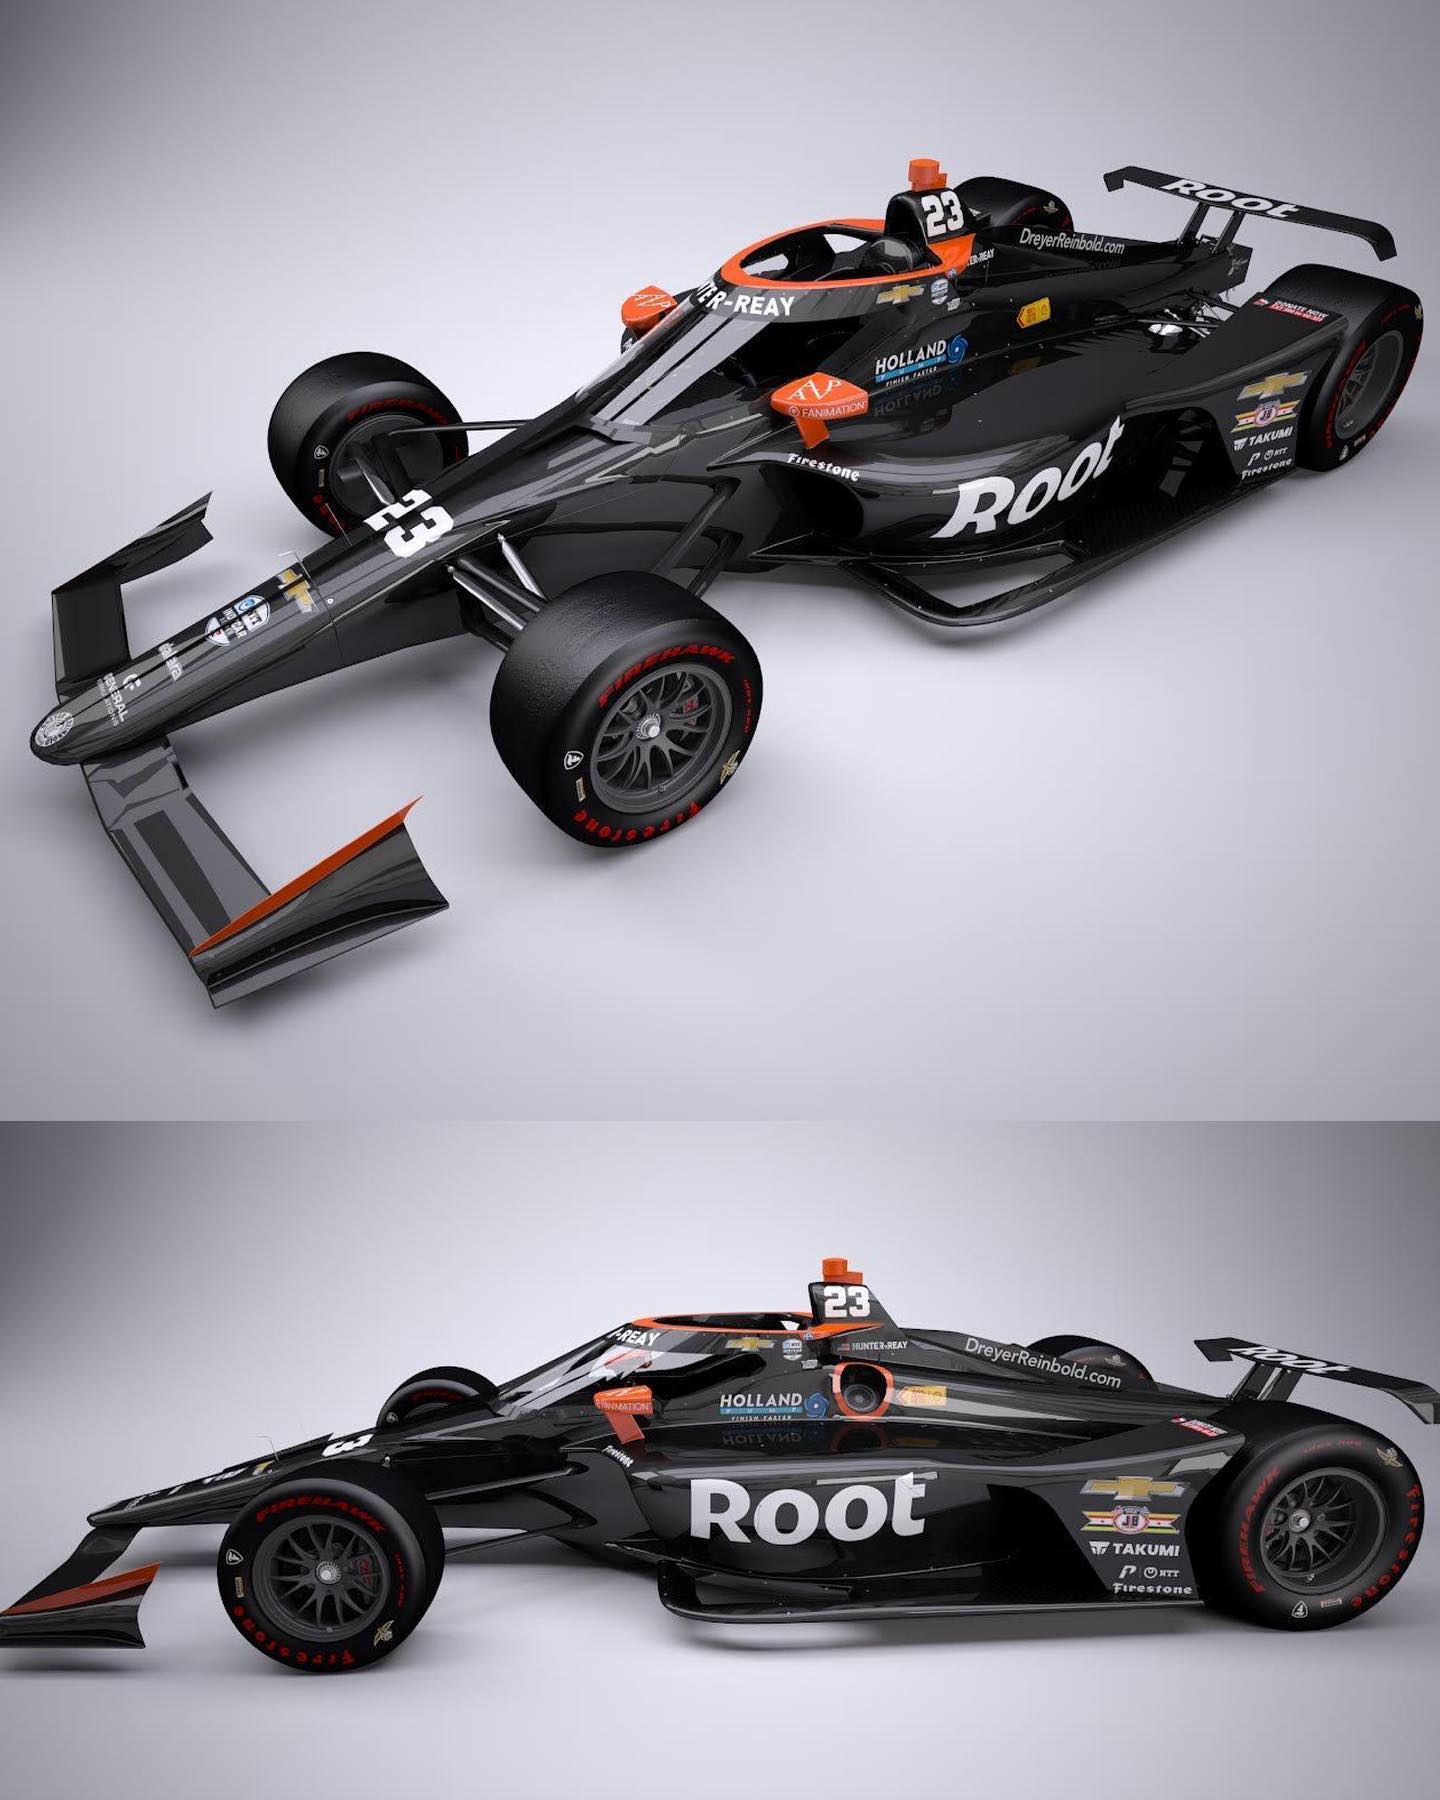 Root Insurance Announces Commitment to Embedded Partnerships with Support for Dreyer & Reinbold Racing Indianapolis 500 Team featuring Driver Ryan Hunter-Reay thumbnail